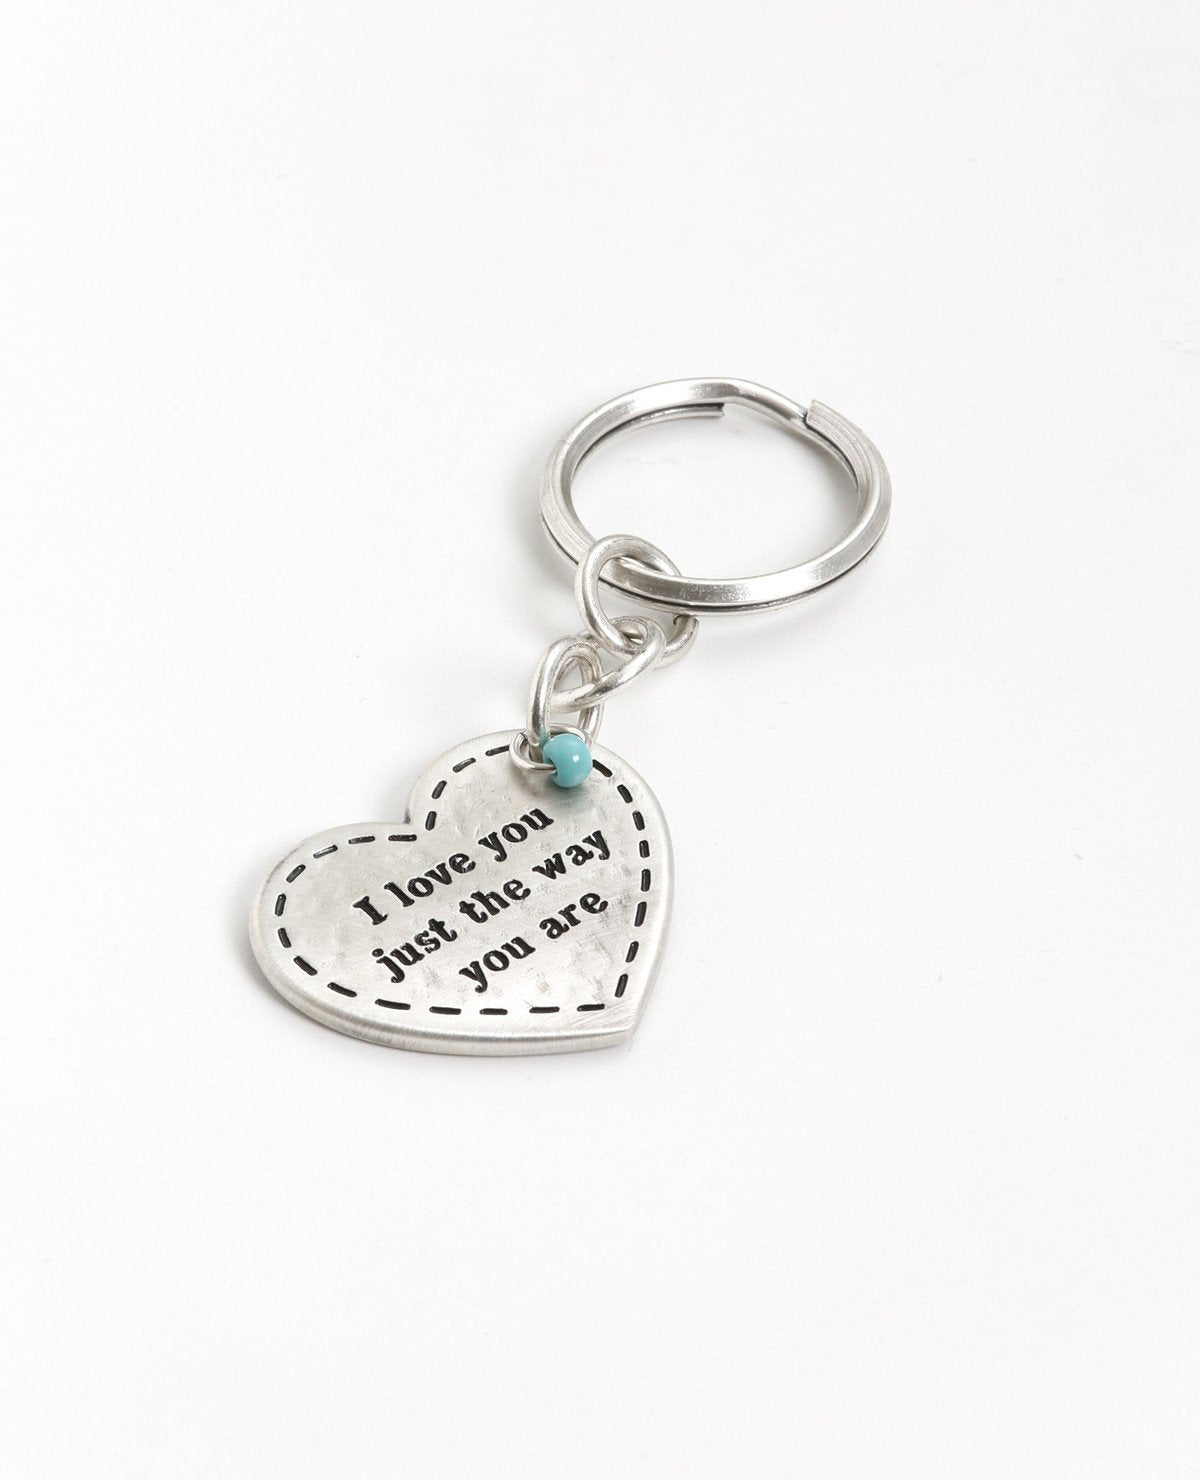 As romantic as it gets! For him and for her. A charming keychain in the shape of a decorated heart with the words "I love you just the way you are" written on one side. On the other side the word "Love" is written in different languages. At the top of the heart hangs a small turquoise colored bead. The keychain is coated in sterling silver and is strong and reliable. Can you think of anything more romantic to give to him or her? Is there anything beyond accepting our loved ones exactly as they are? 
Comes a